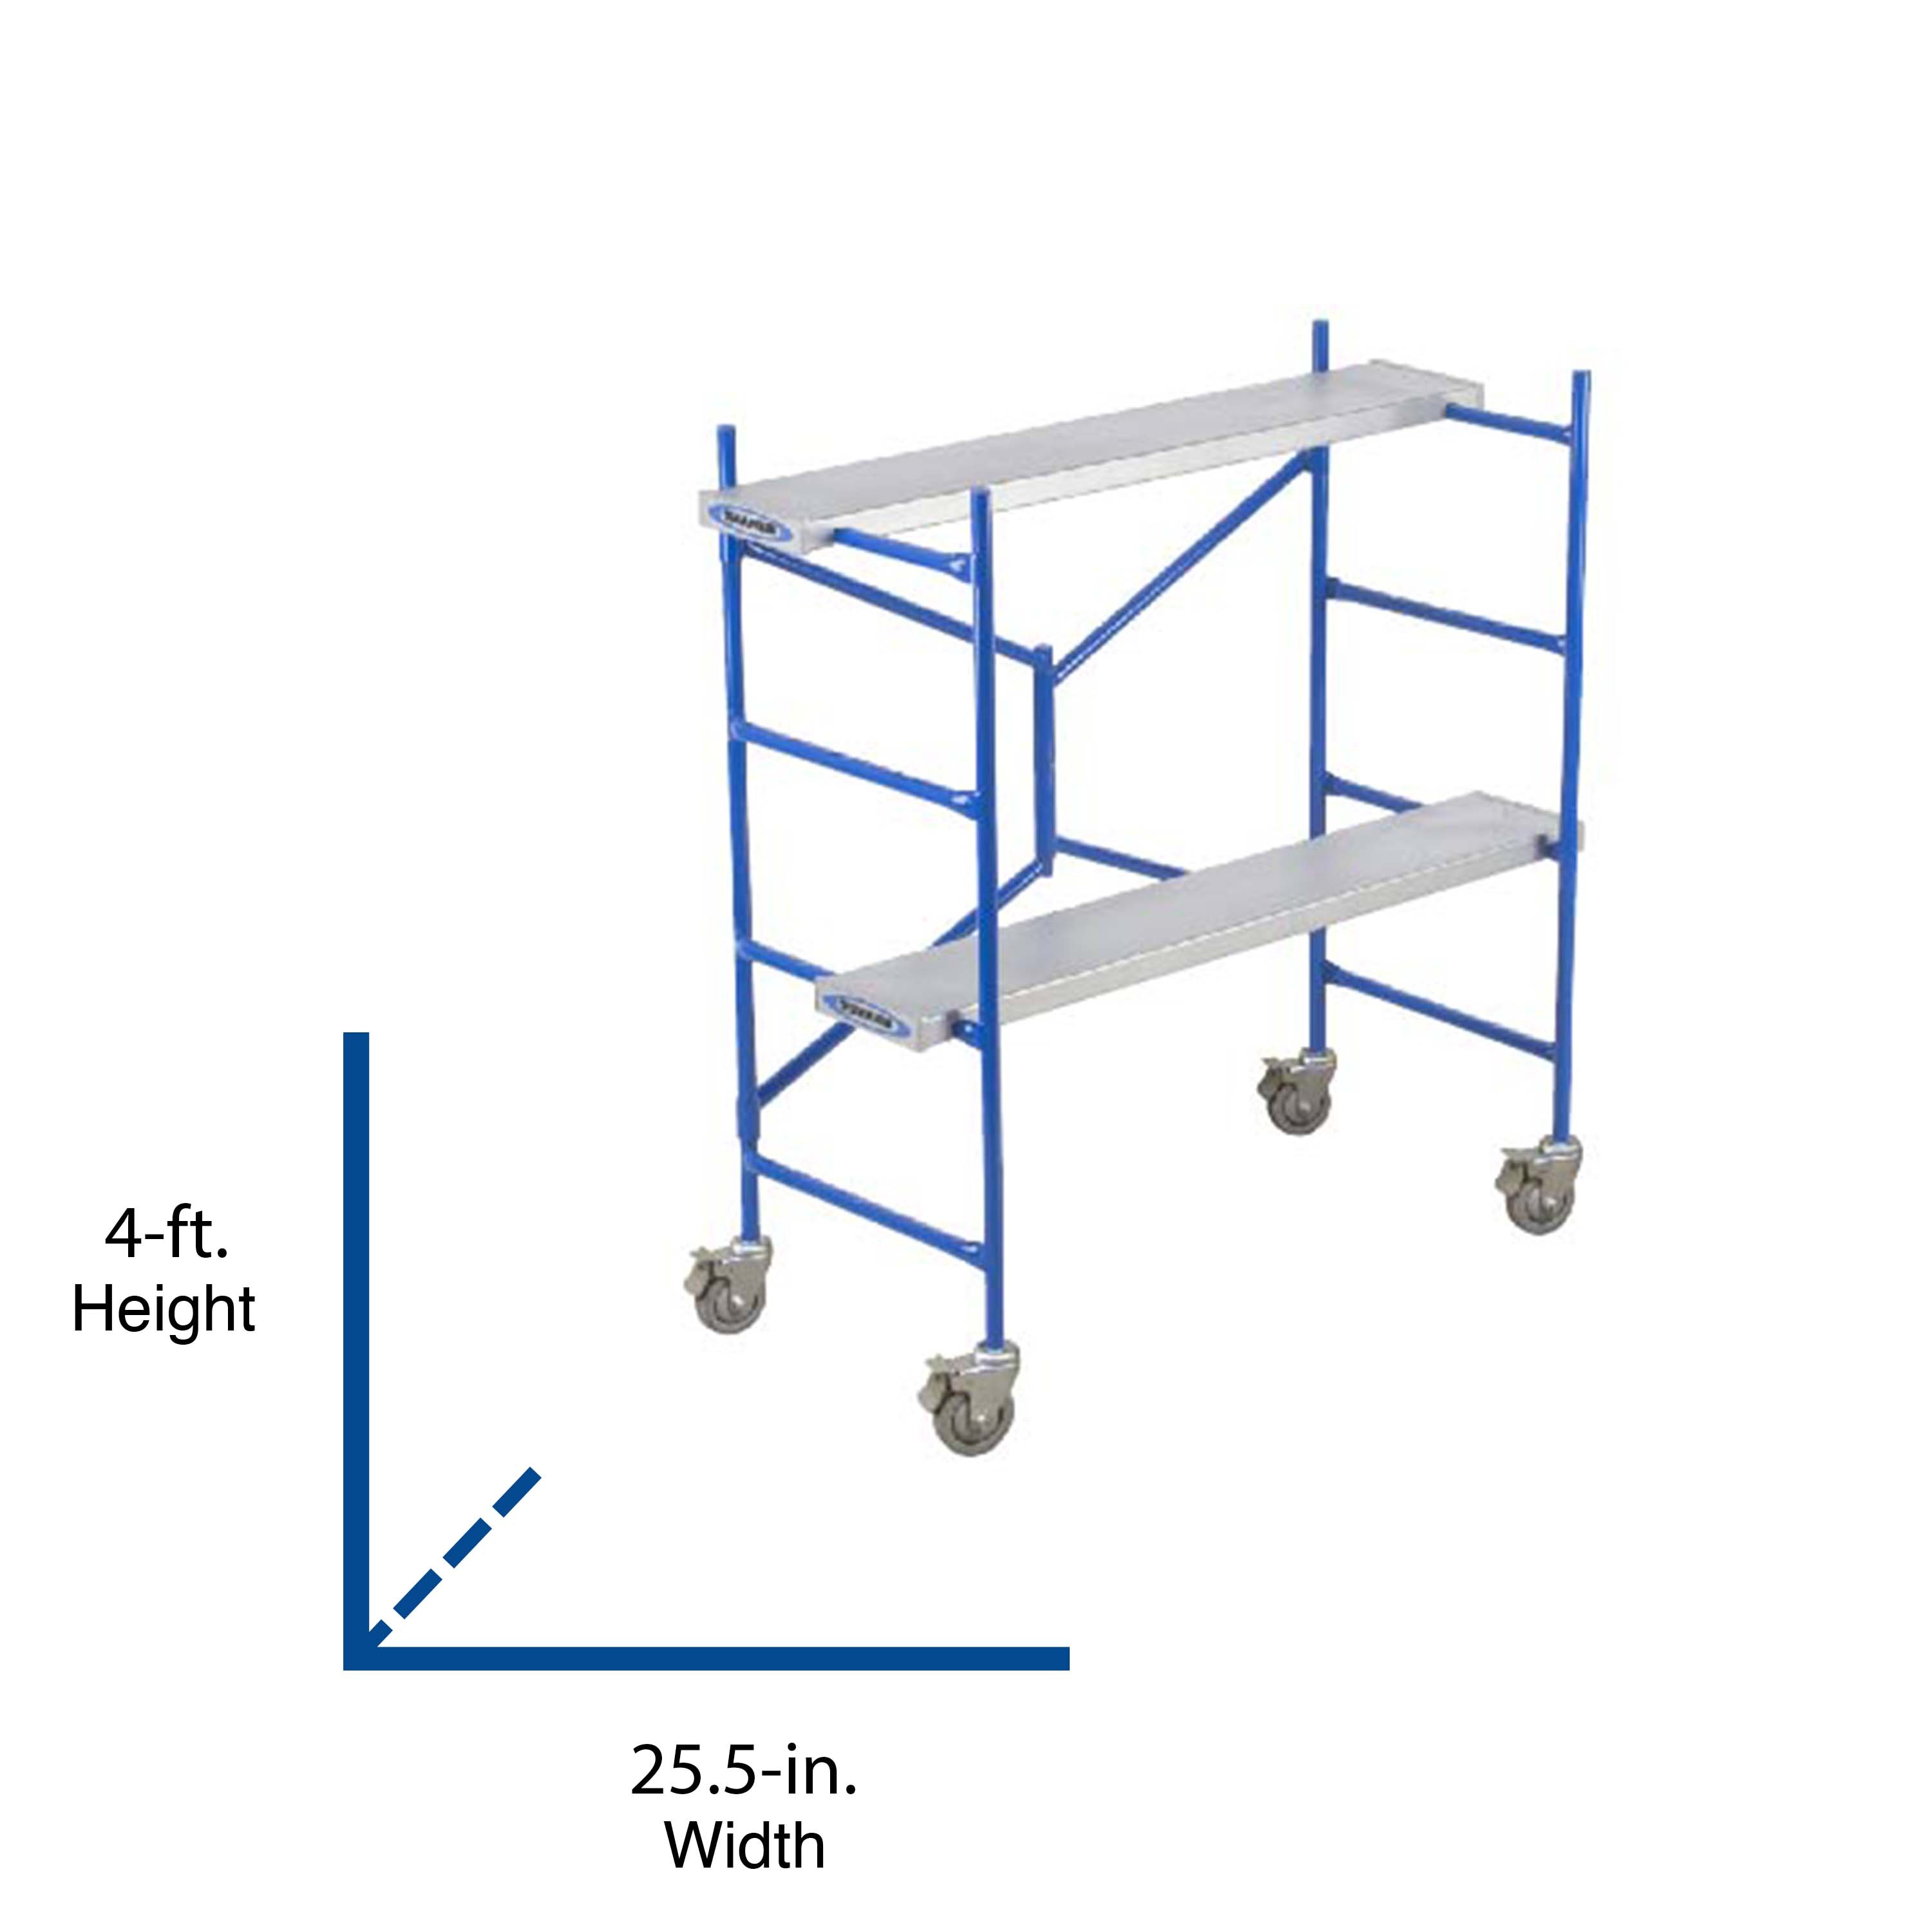 Load Capacity Scaffolding Frame Tower for sale online Werner Portable Rolling Scaffold 500 Lb